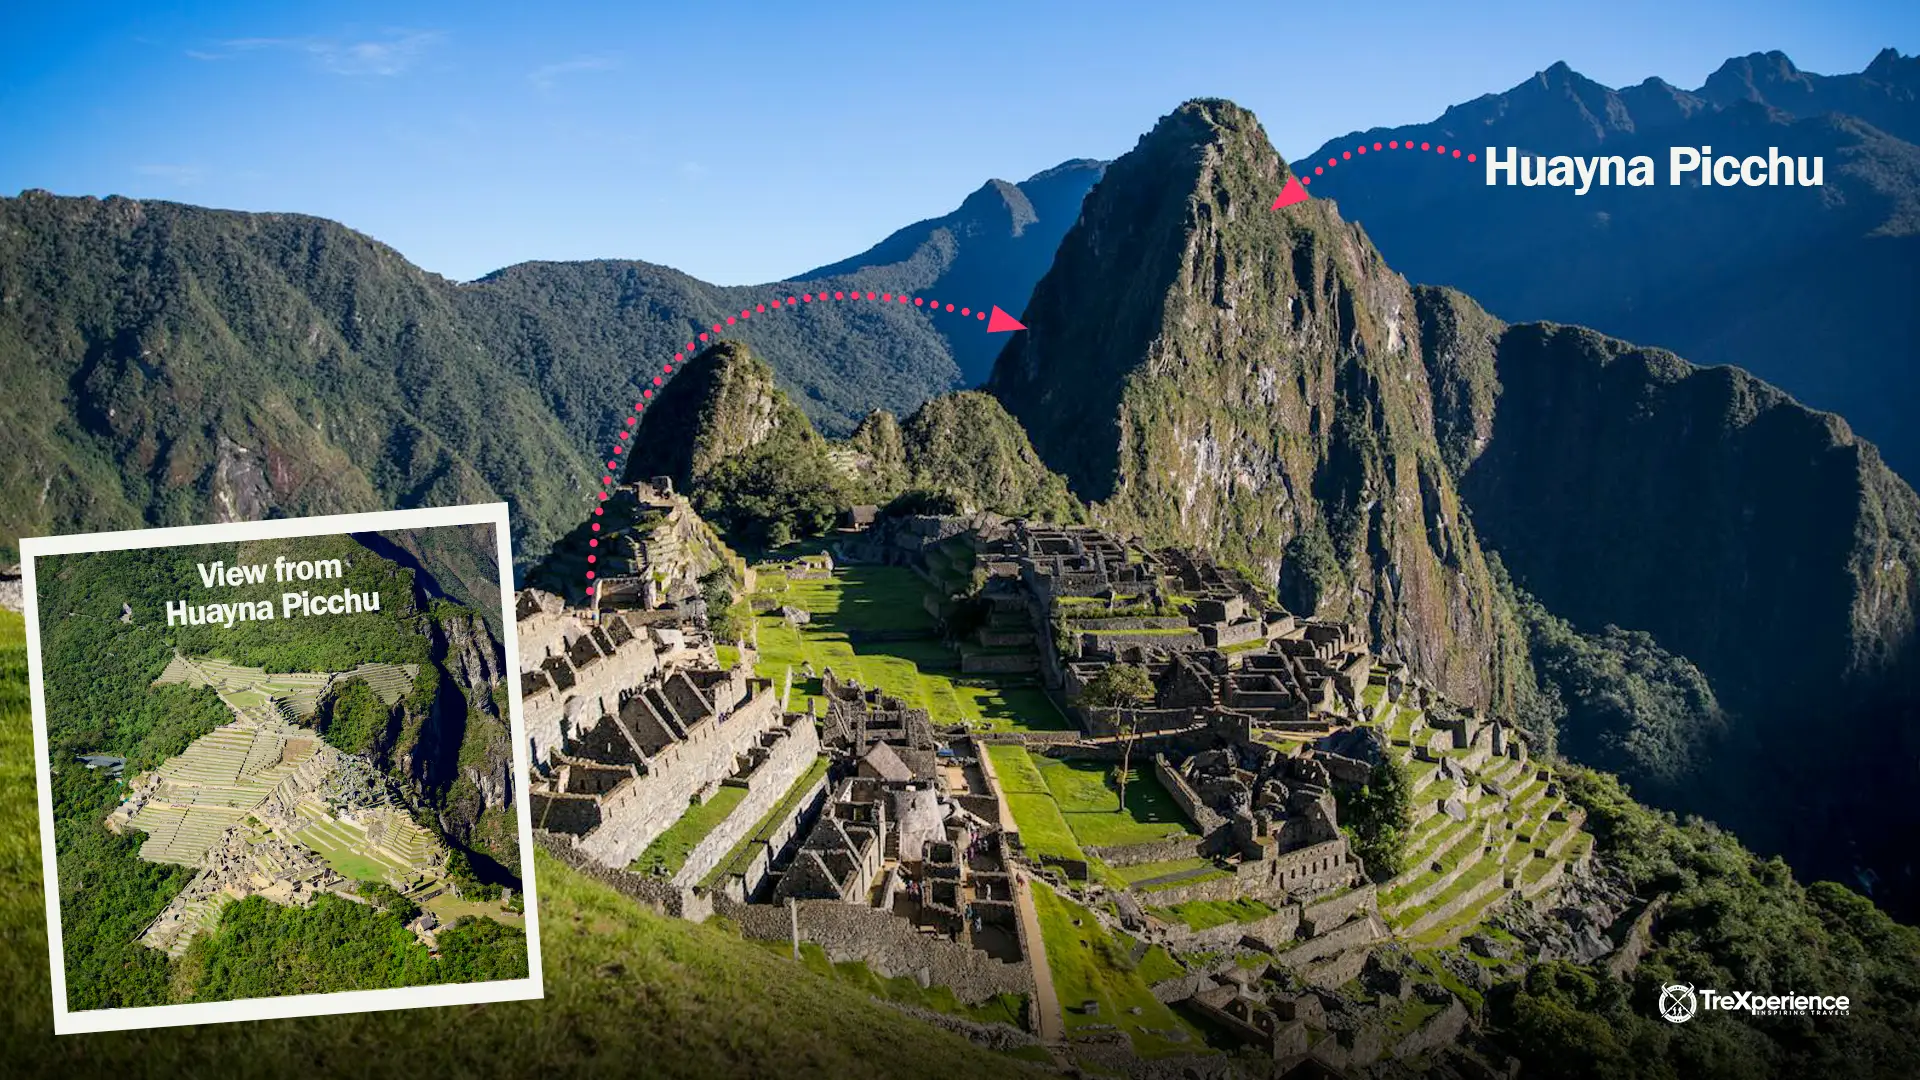 Huayna Picchu Mountain: Everything You Need to Know